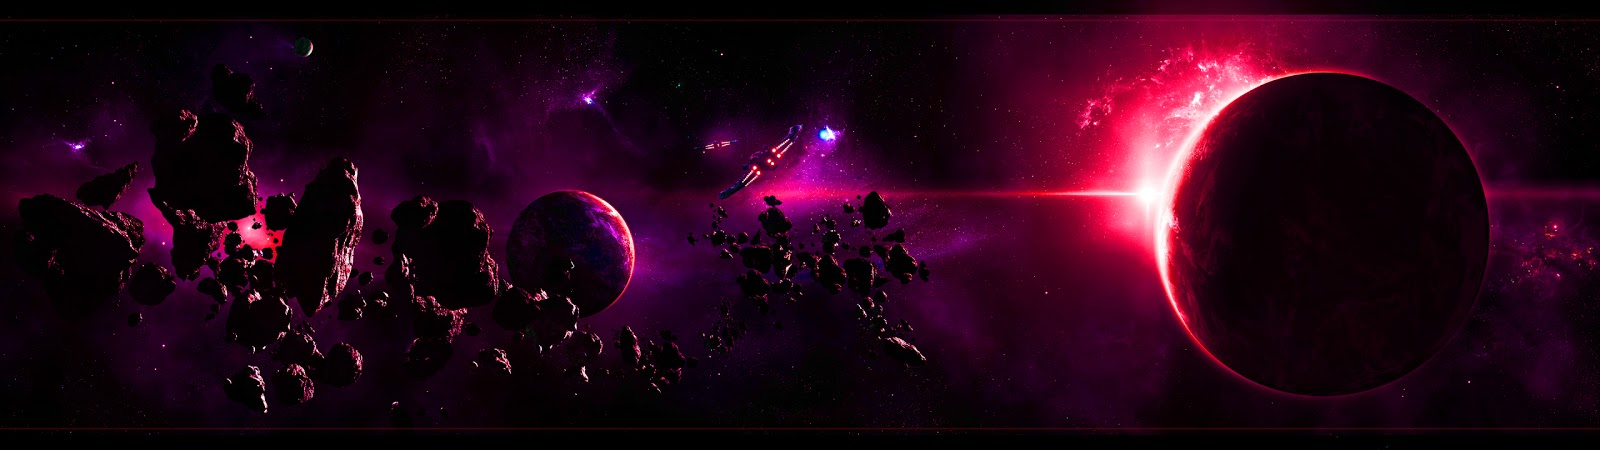 Day Dual Screen Monitor Purple Pla With Asteroids Space Wallpaper